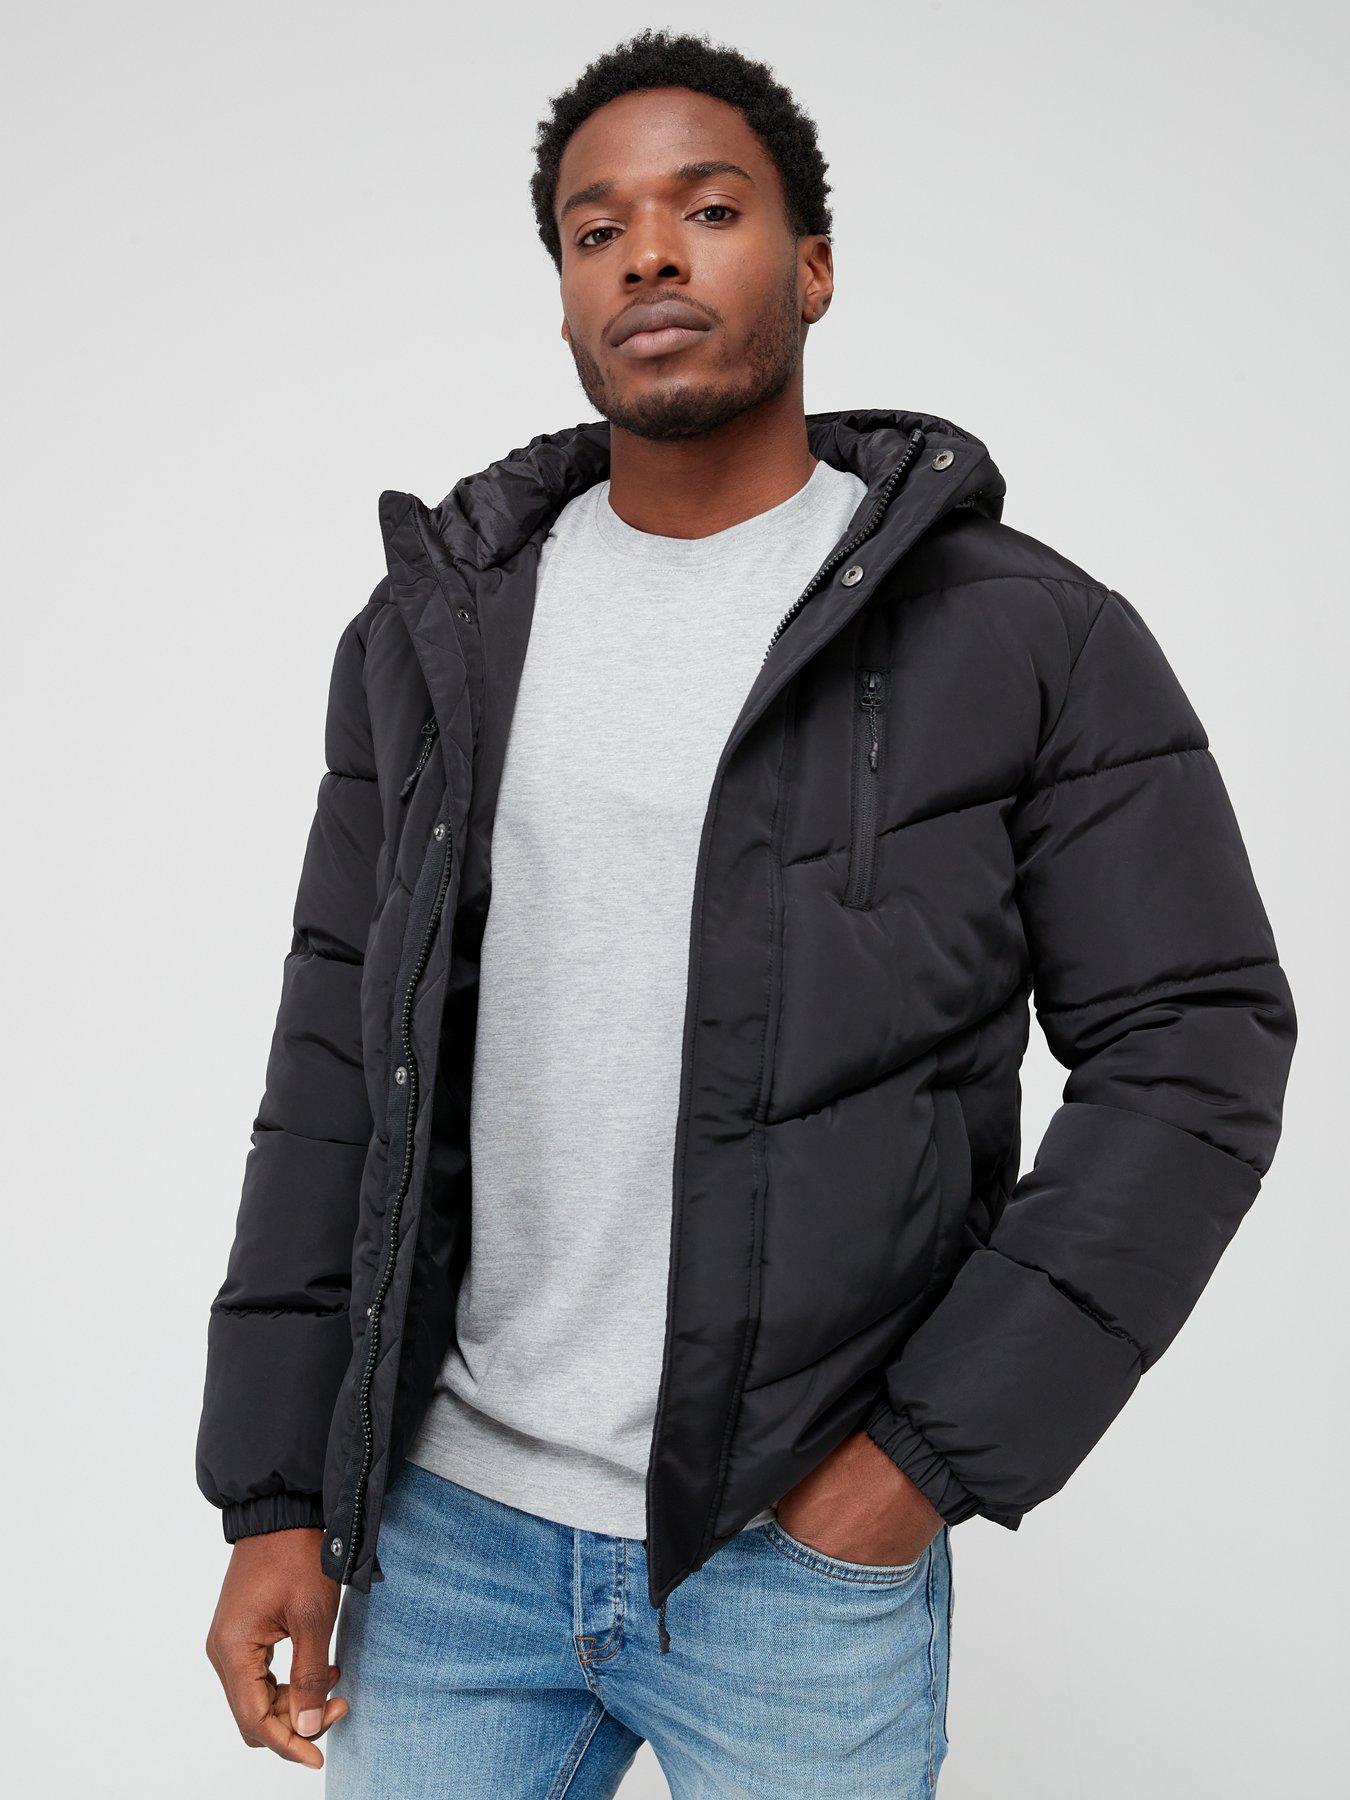   Essentials Men's Packable Lightweight Water-Resistant Puffer  Jacket (Available in Big & Tall), Black, X-Small : Sports & Outdoors